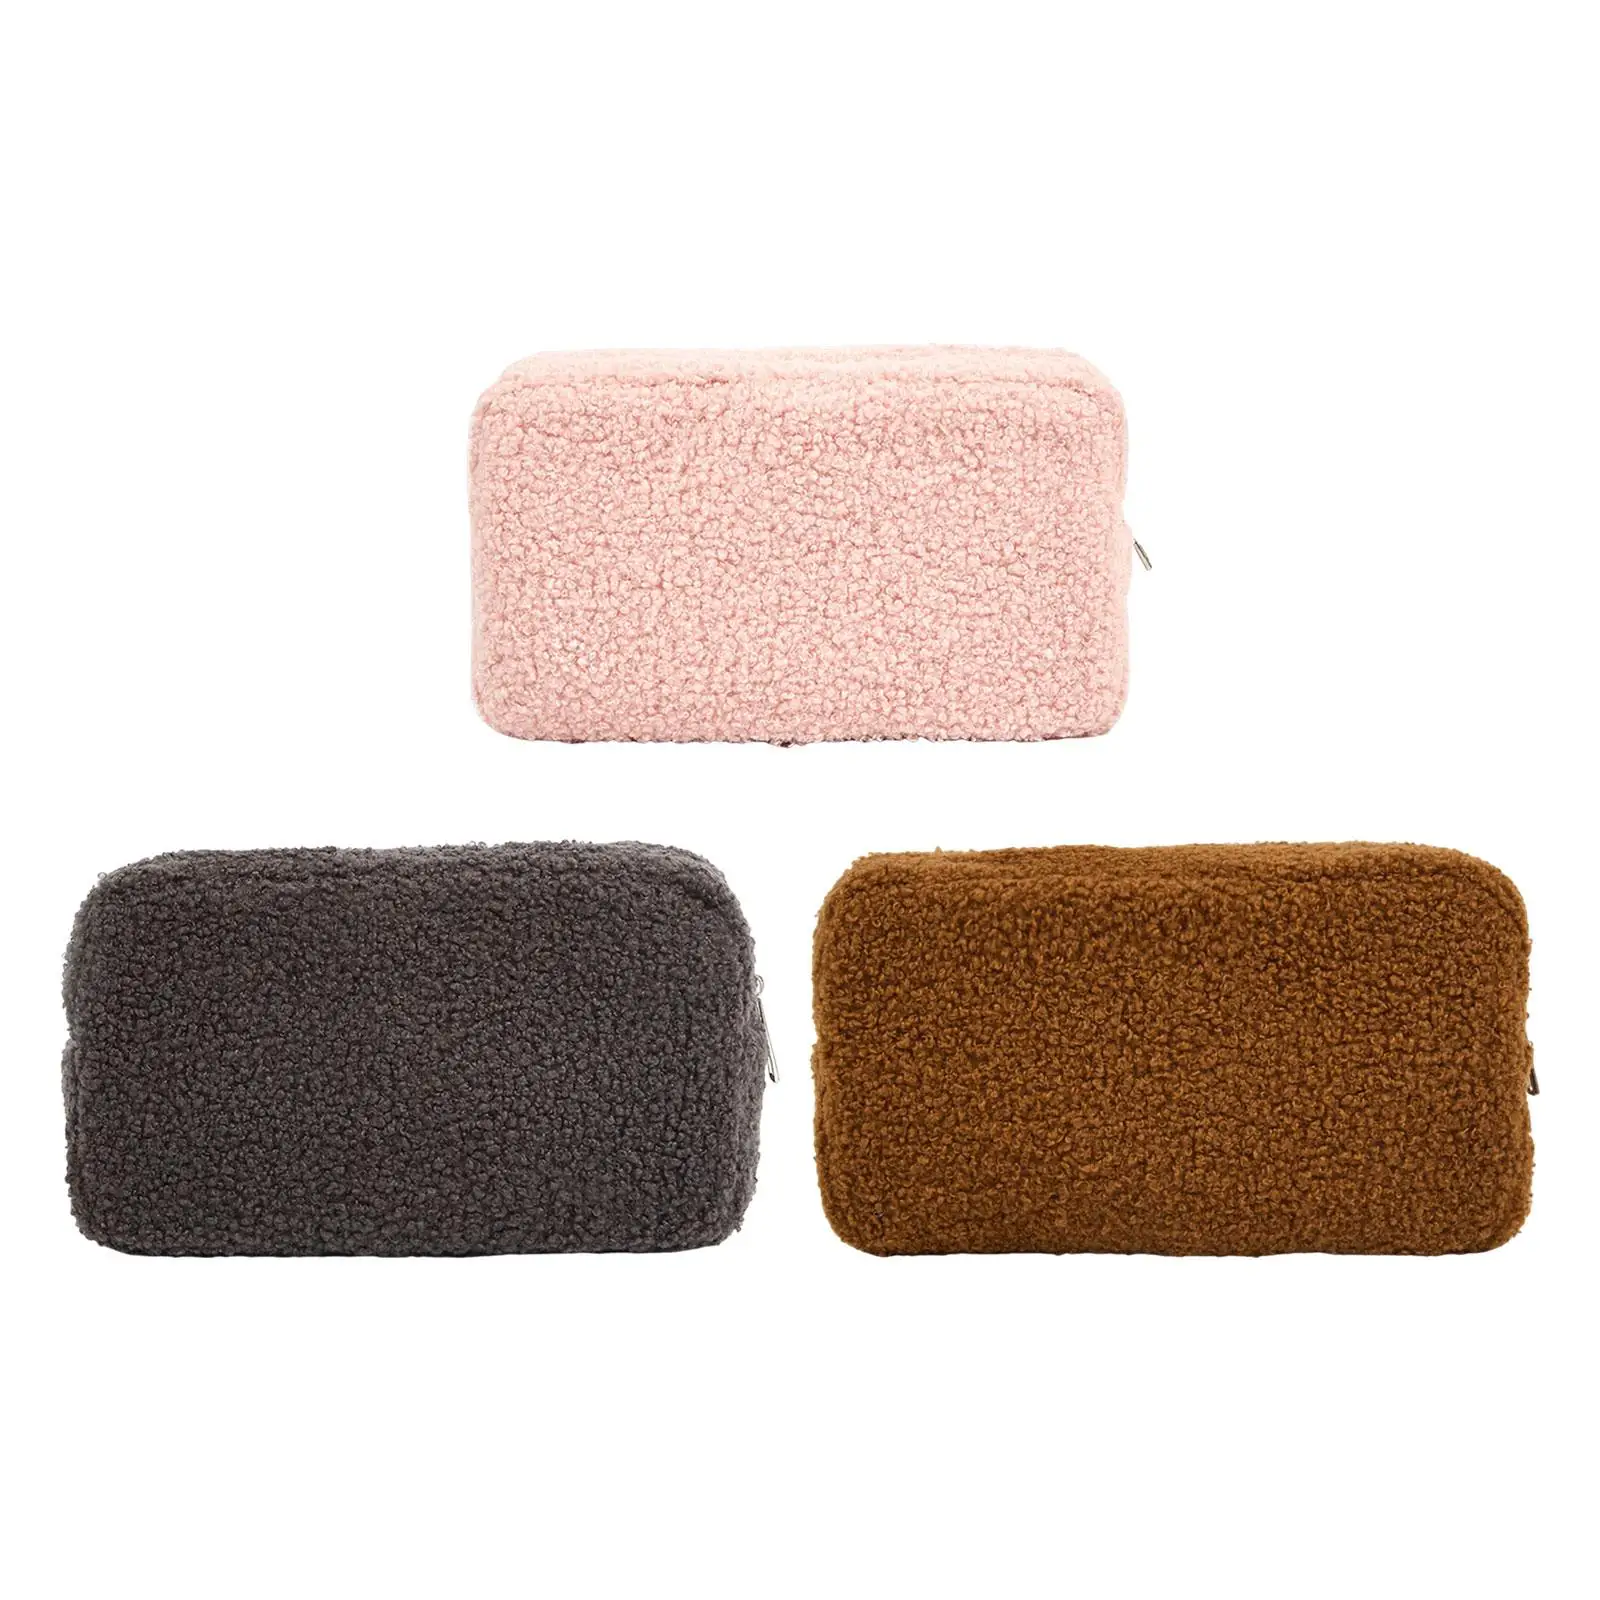 Cosmetic Bag Plush Fabric Toiletry Bag for Traveling Hair Accessories Girls